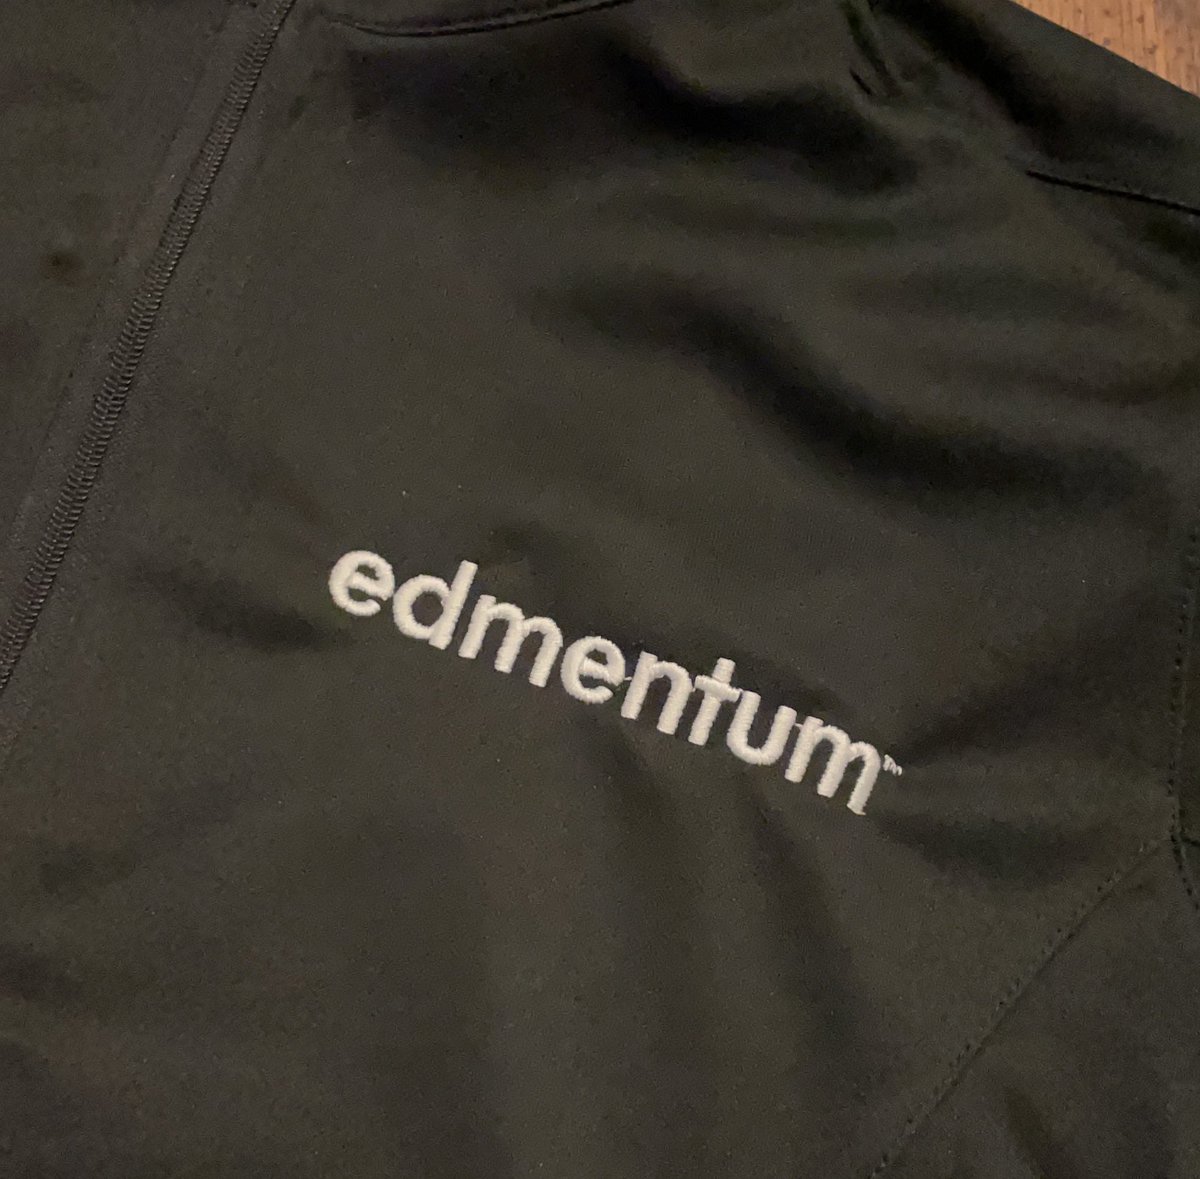 Thank you @CandeeJamie   Love the swag!  #edmentum #educatorfirst #pride #littlethingsmeanalot